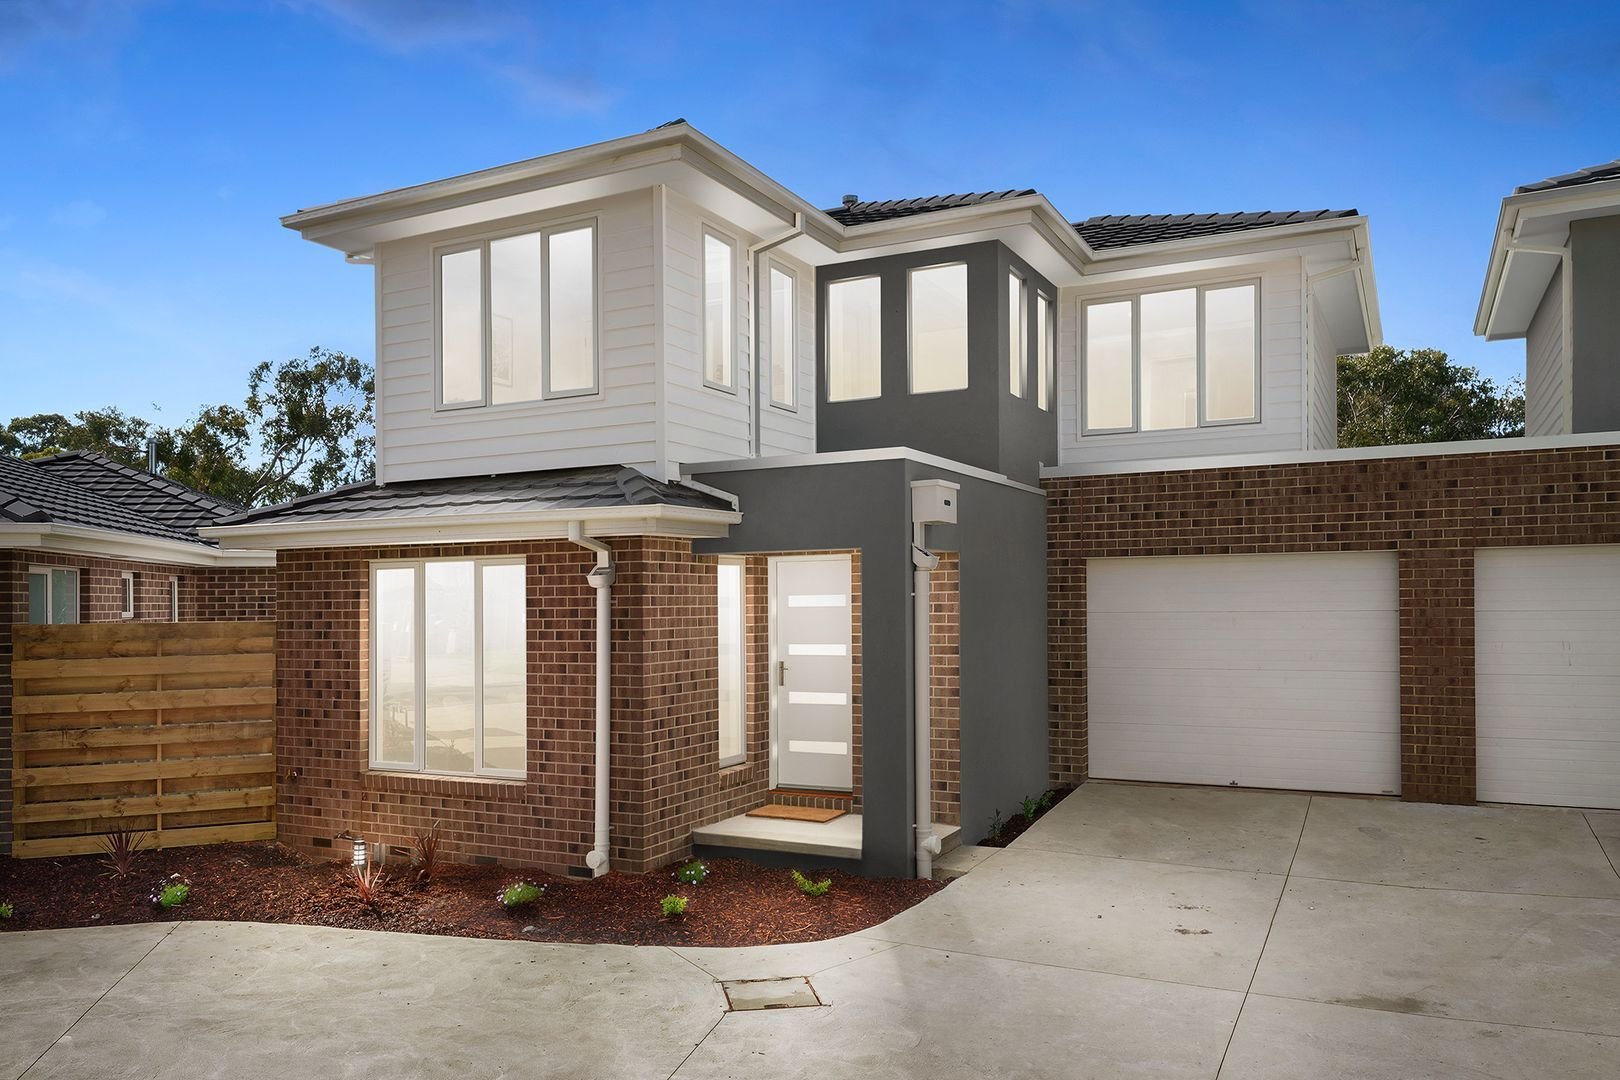 Croydon - Vinter Avenue - 52-62 Vinter Avenue, Croydon, VIC 3136 - Townly - 10.jpg